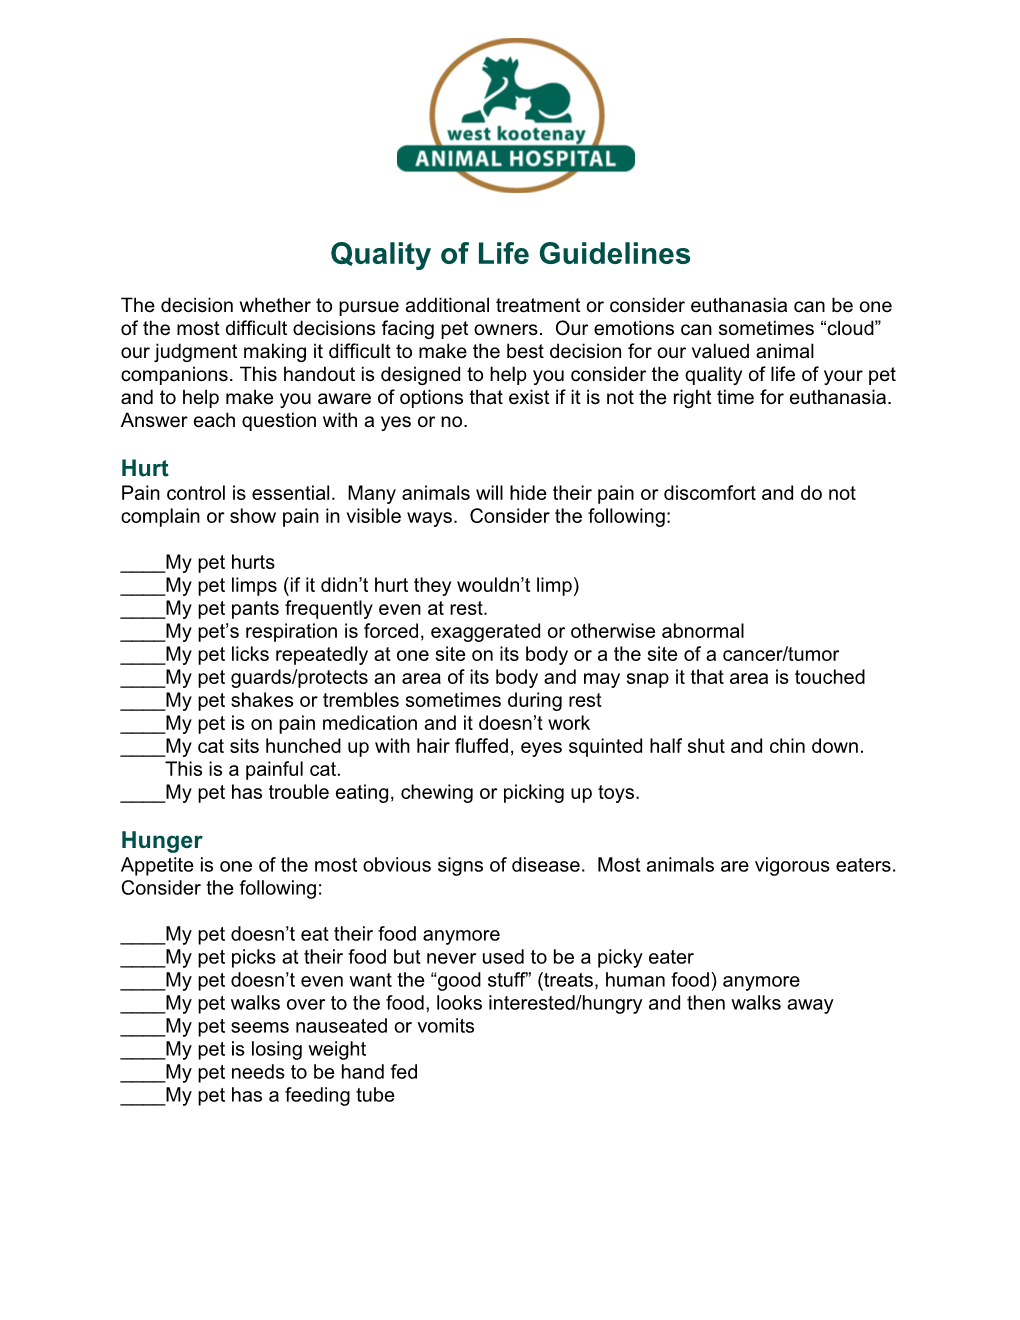 Quality of Life Guidelines